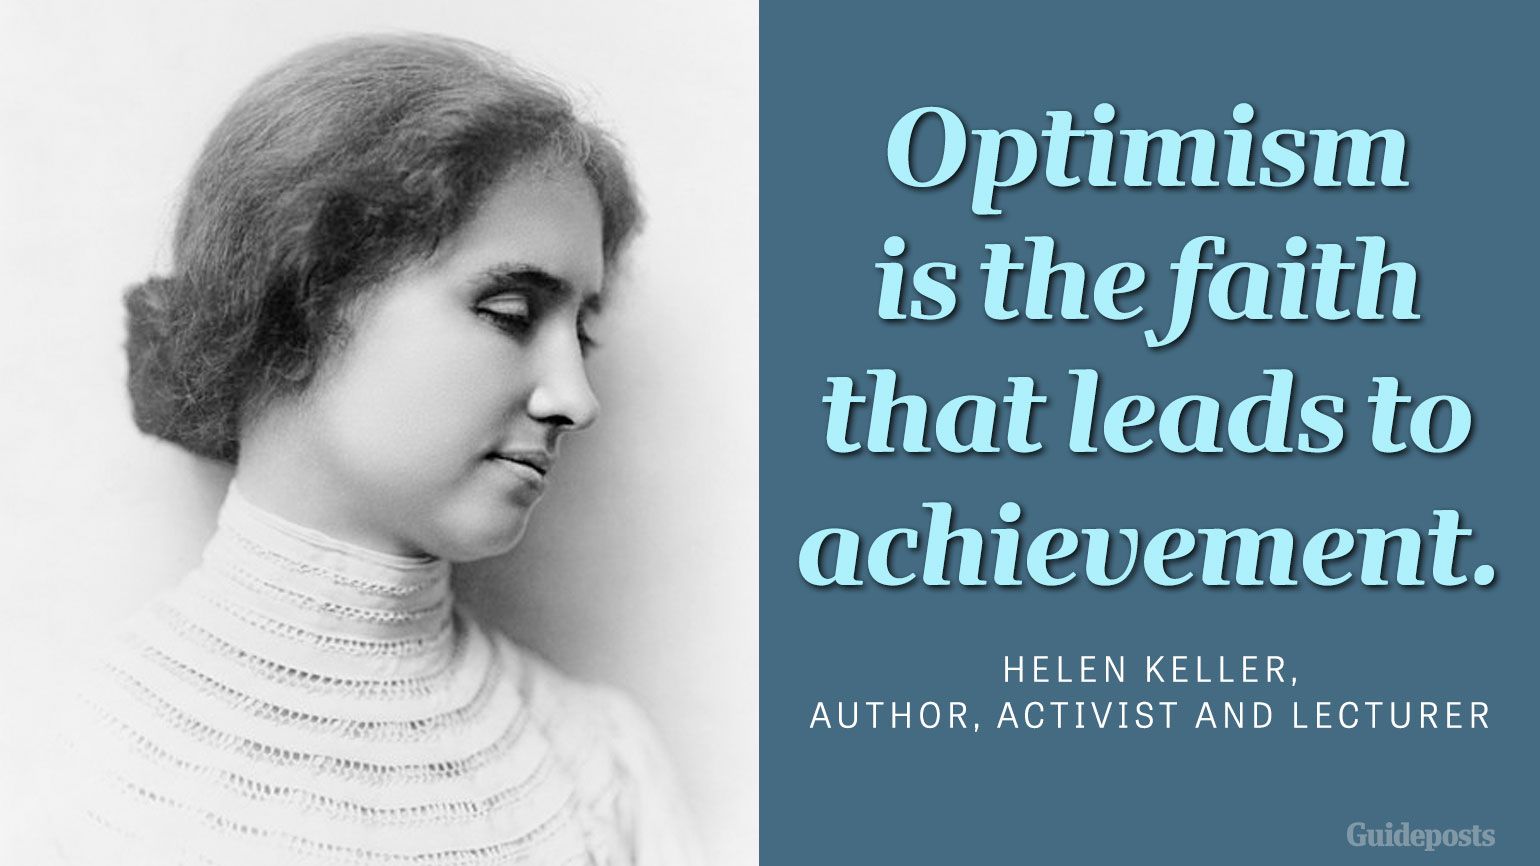 quotes by famous women in history